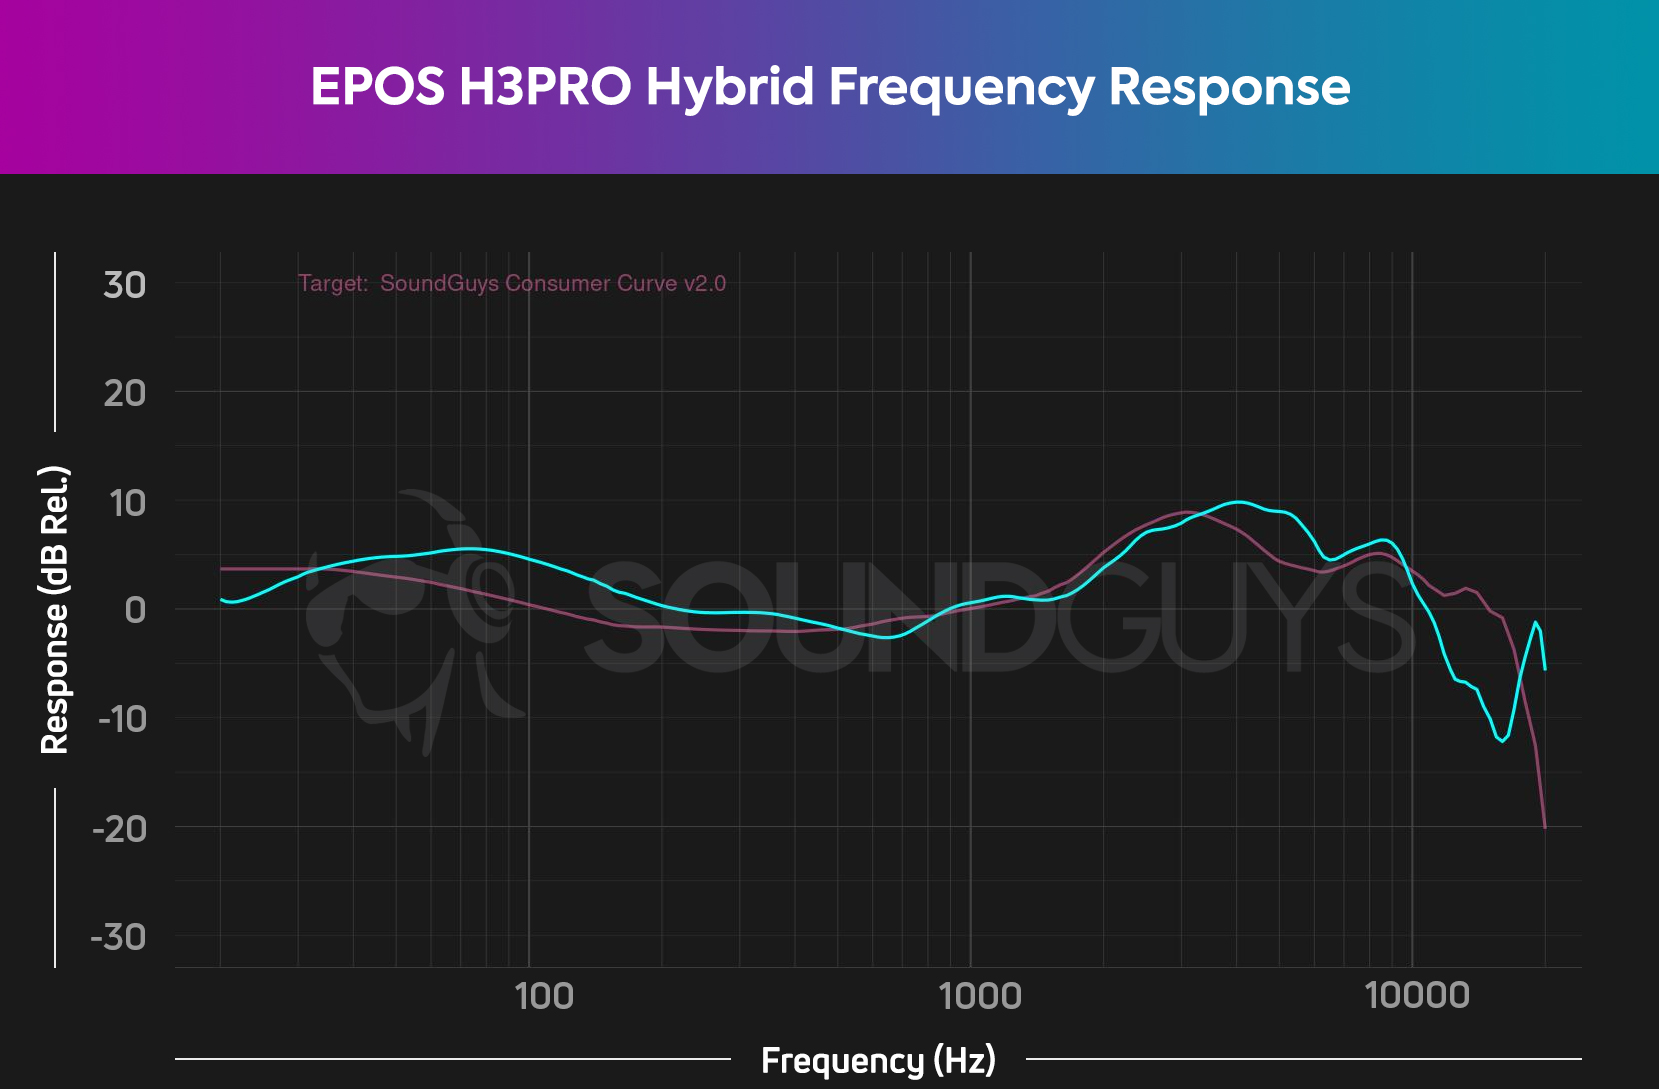 A frequency response chart for the EPOS H3PRO Hybrid gaming headset, which shows a very accurate frequency response.